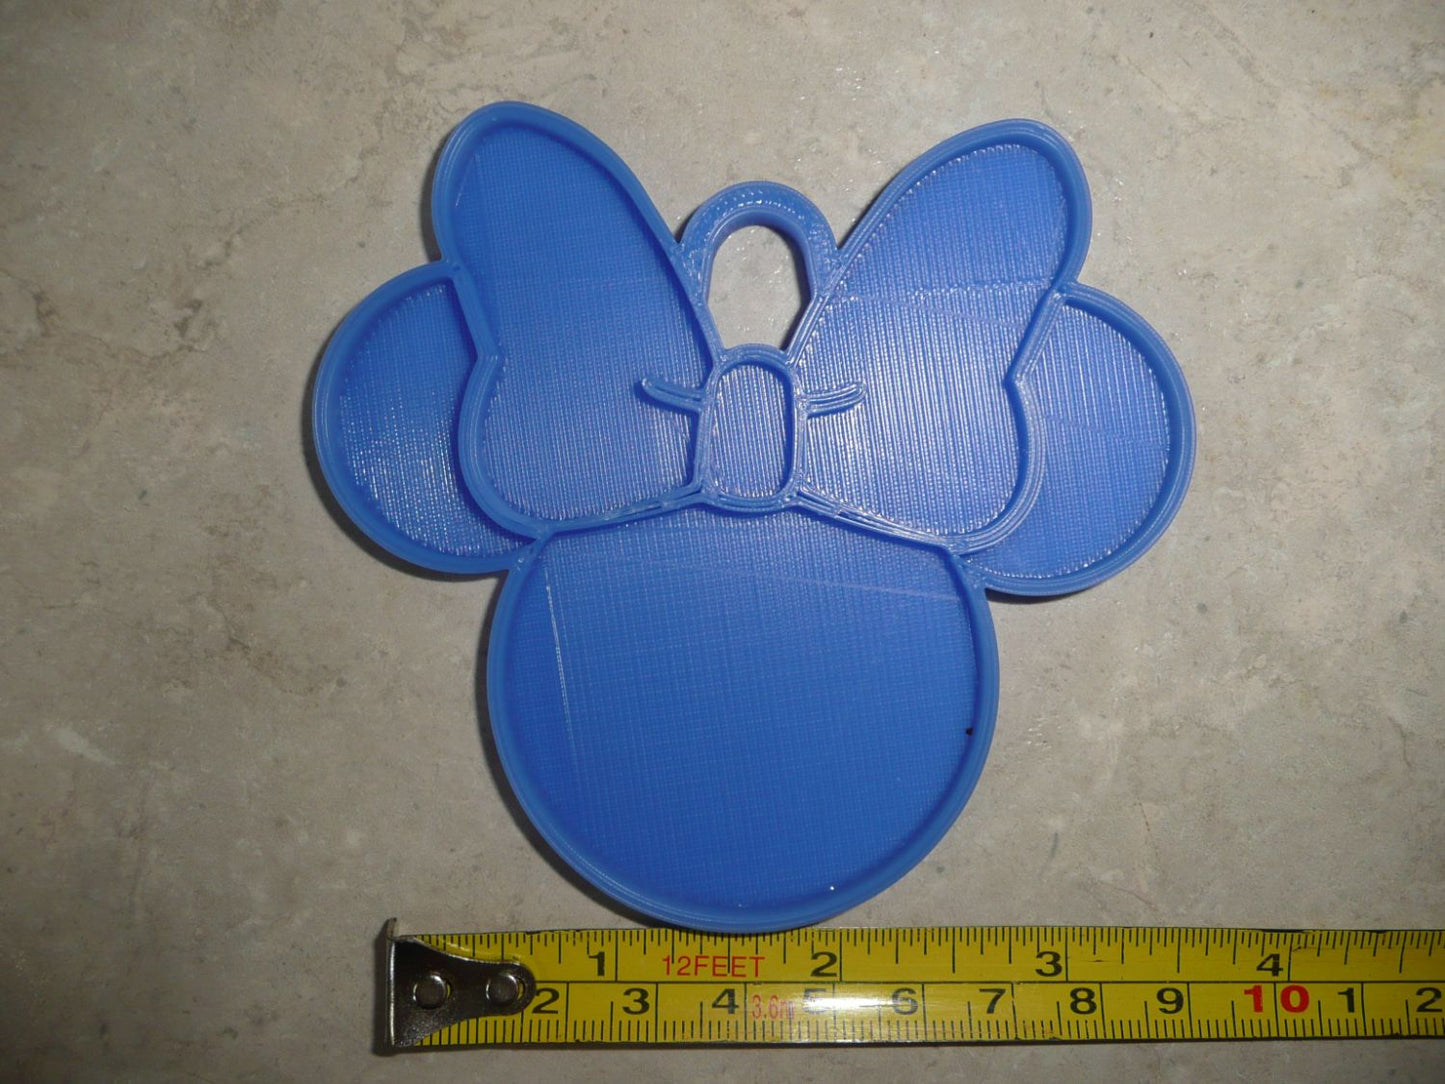 Minnie Mouse Face Ears Shape Blue Christmas Ornament Made in USA PR4875